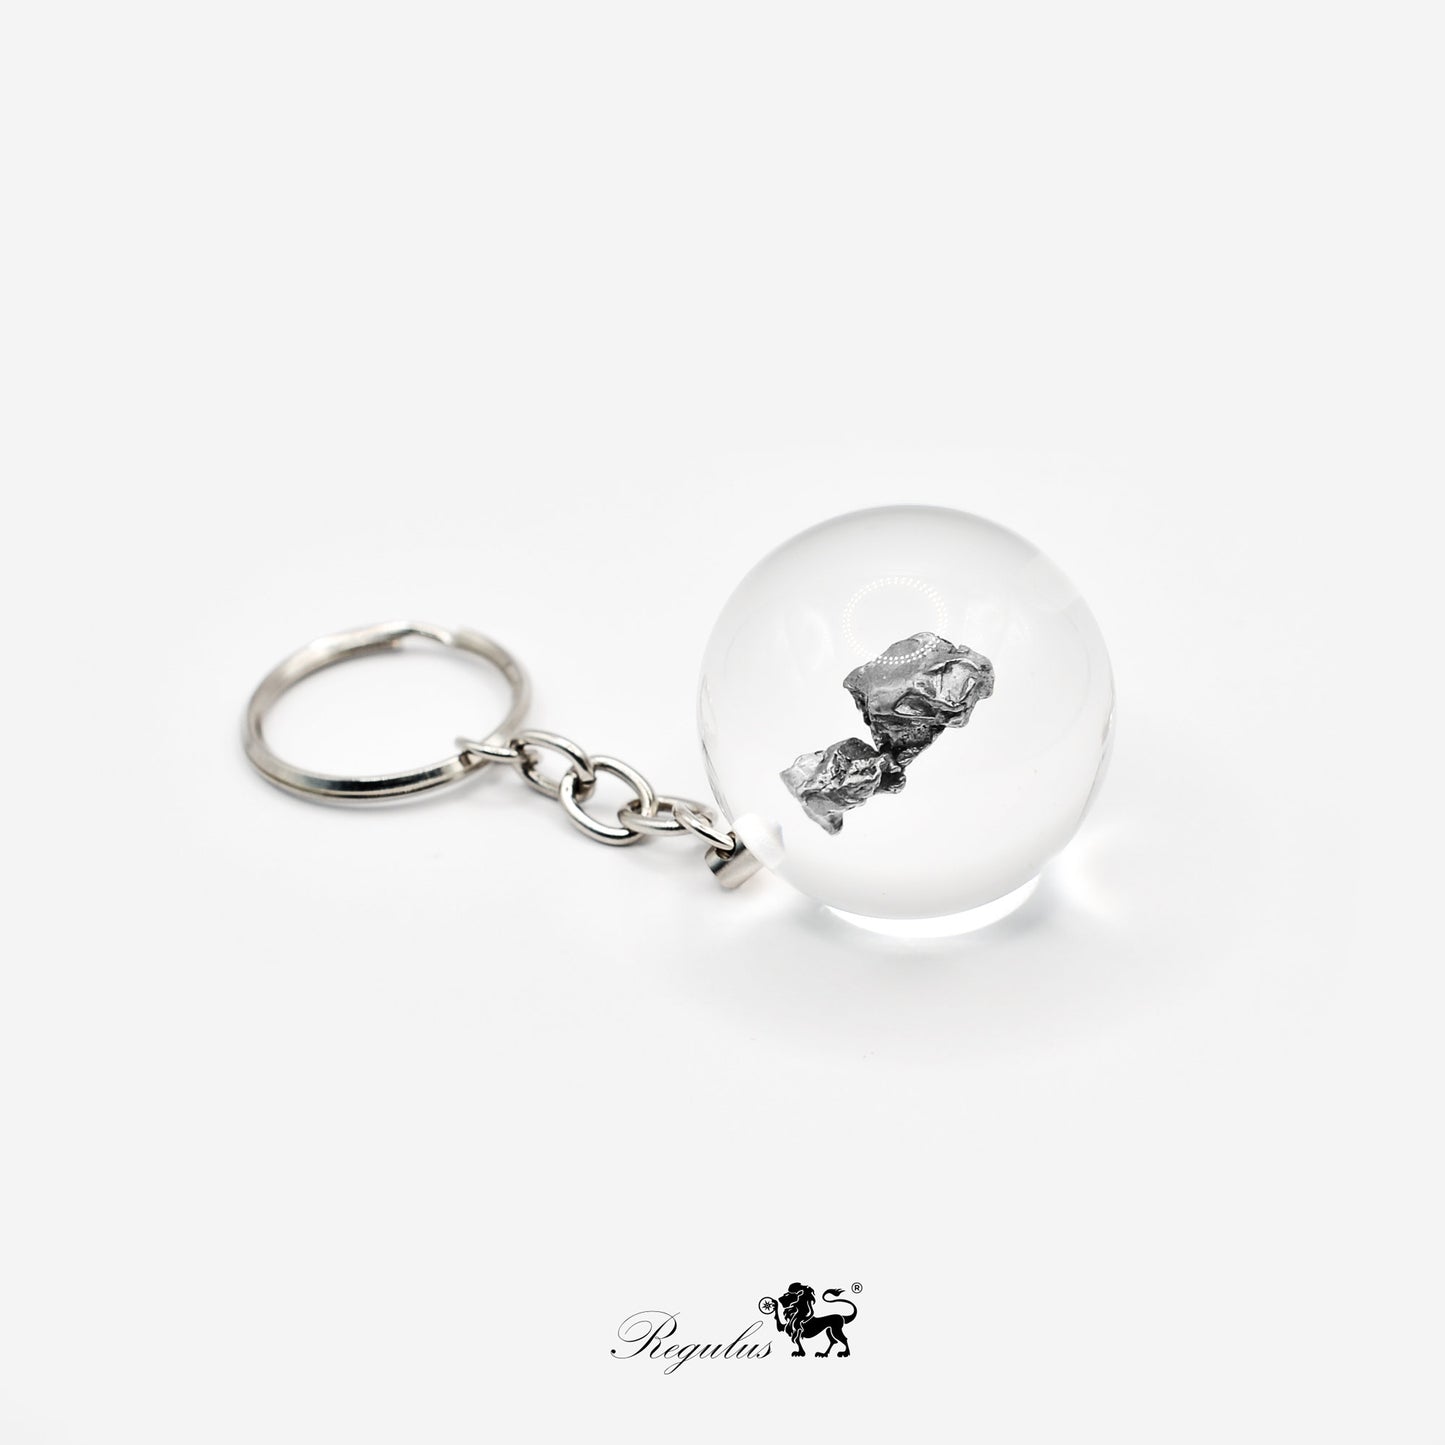 Meteorite Key chain,Campo Del Cielo iron meteorite Inside Crystal Ball,Outer Space Gift